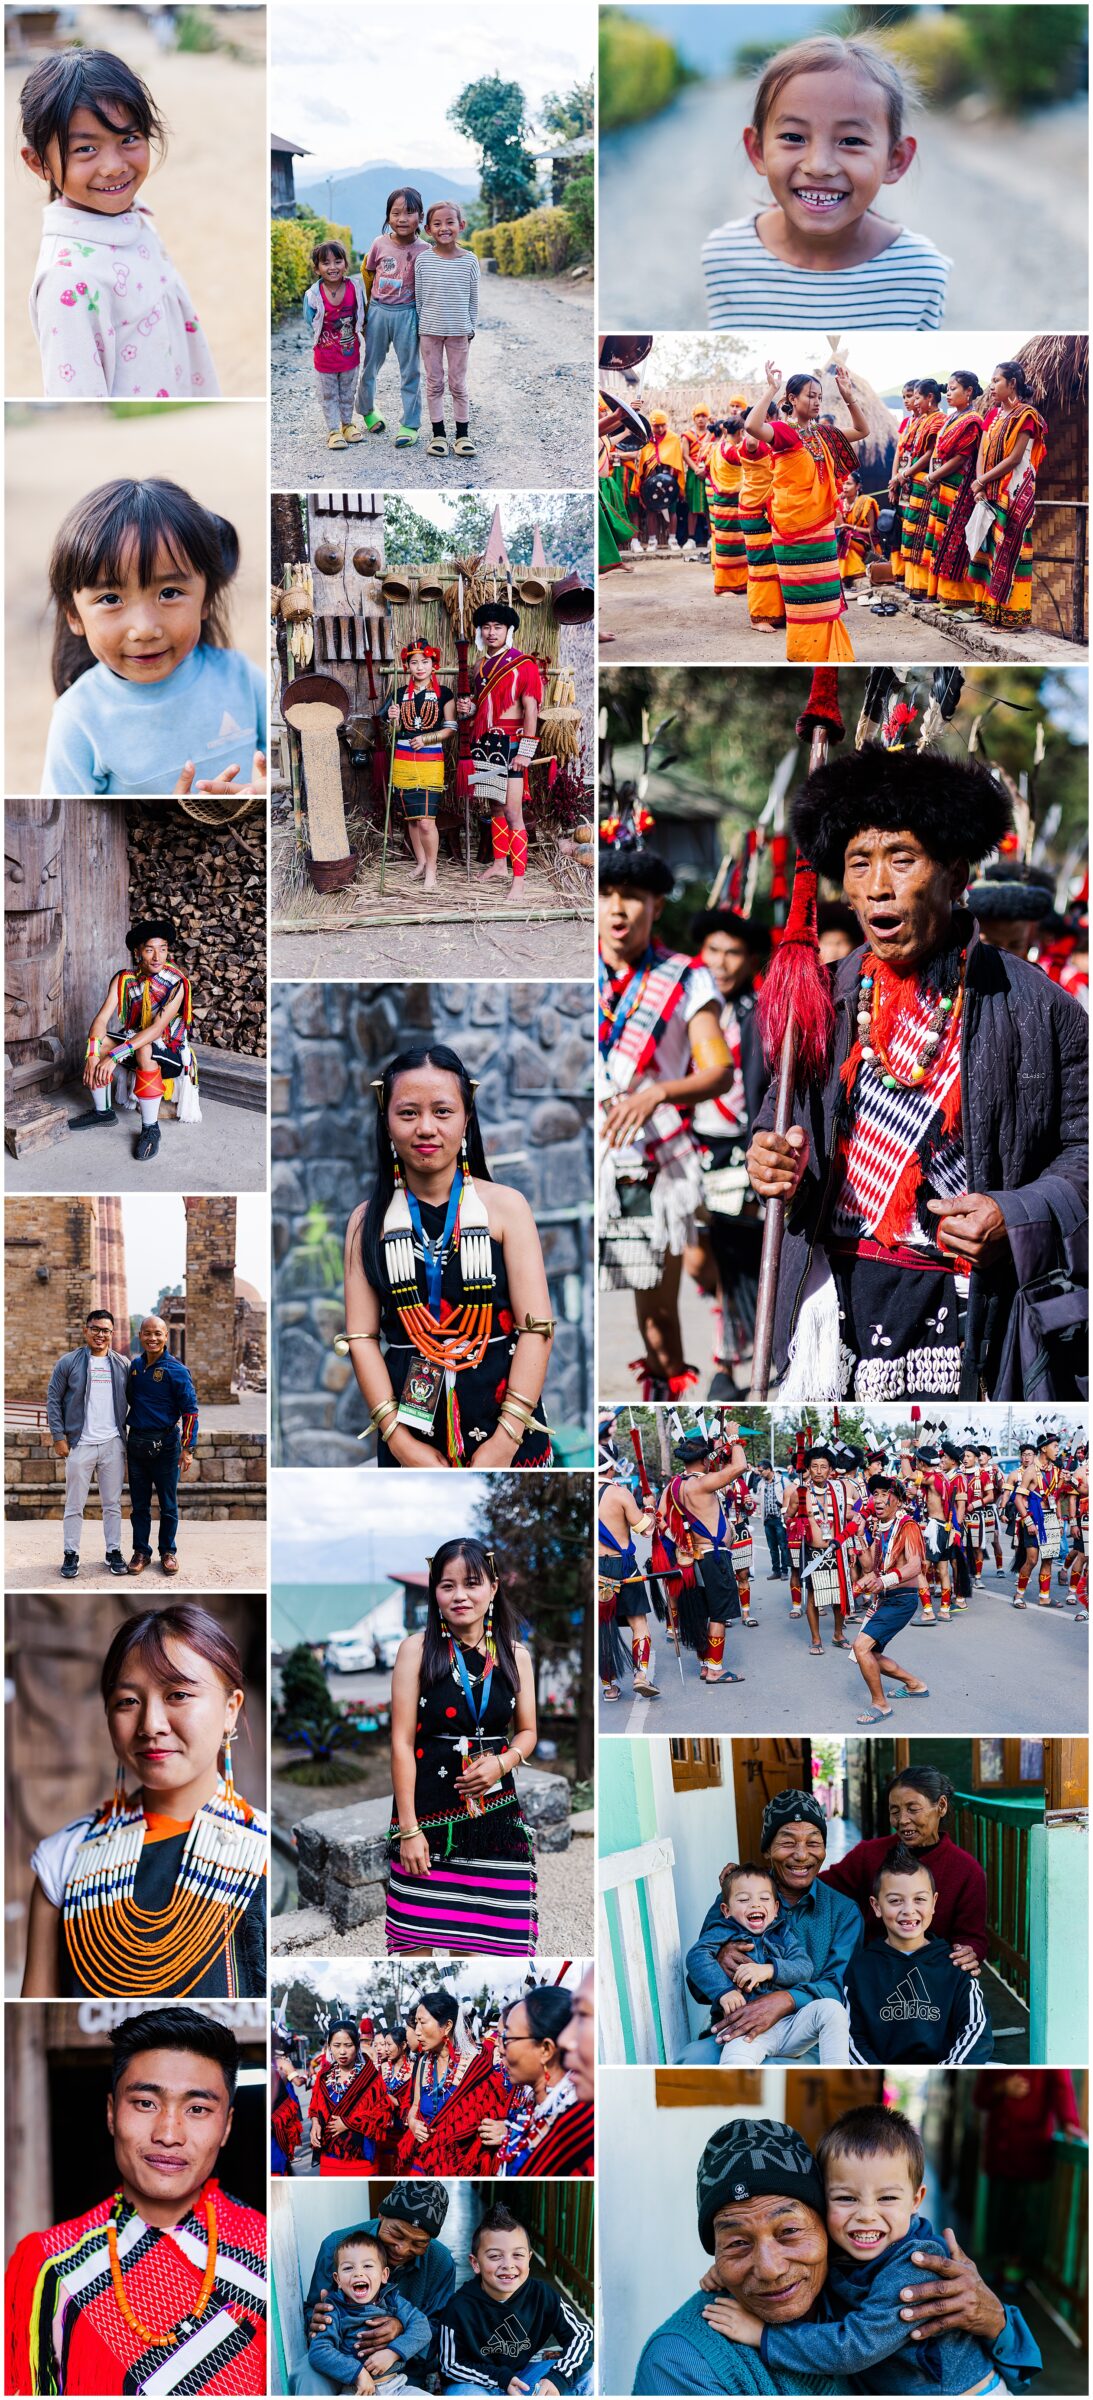 Colorful images from Nagaland Hornbill festival 